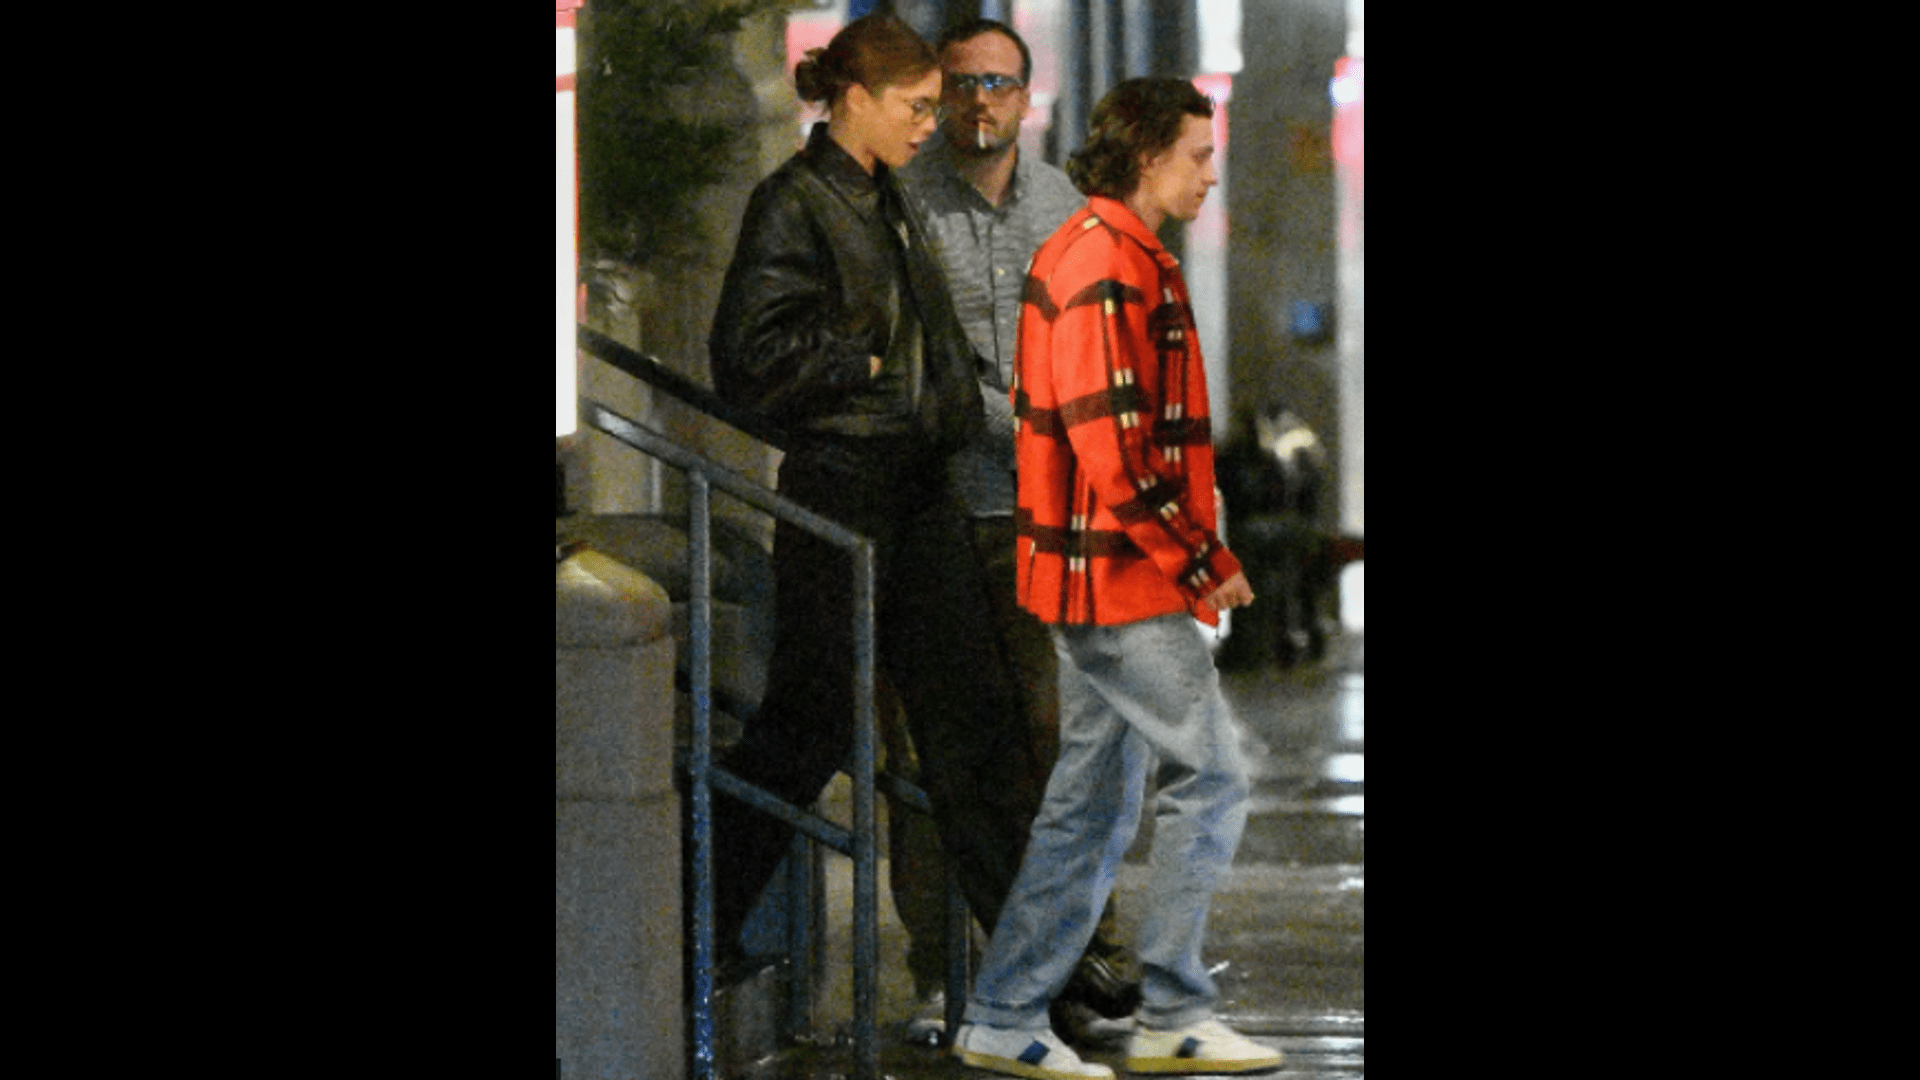 rainy-night-in-new-york-zendaya-and-tom-holland-have-a-romantic-date